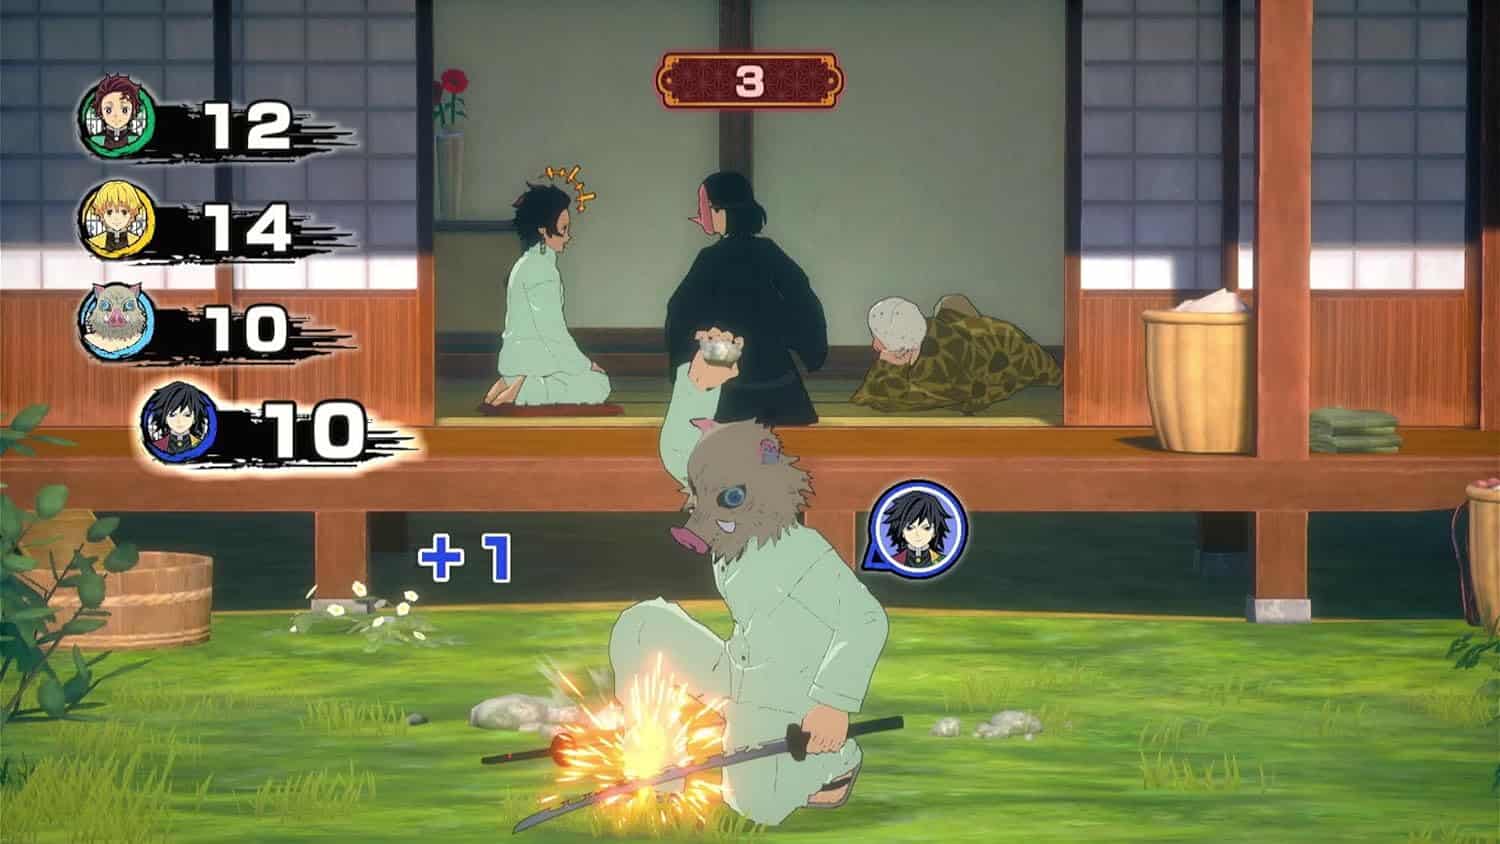 Demon Slayer Sweep the Board release date, time, trailers and gameplay